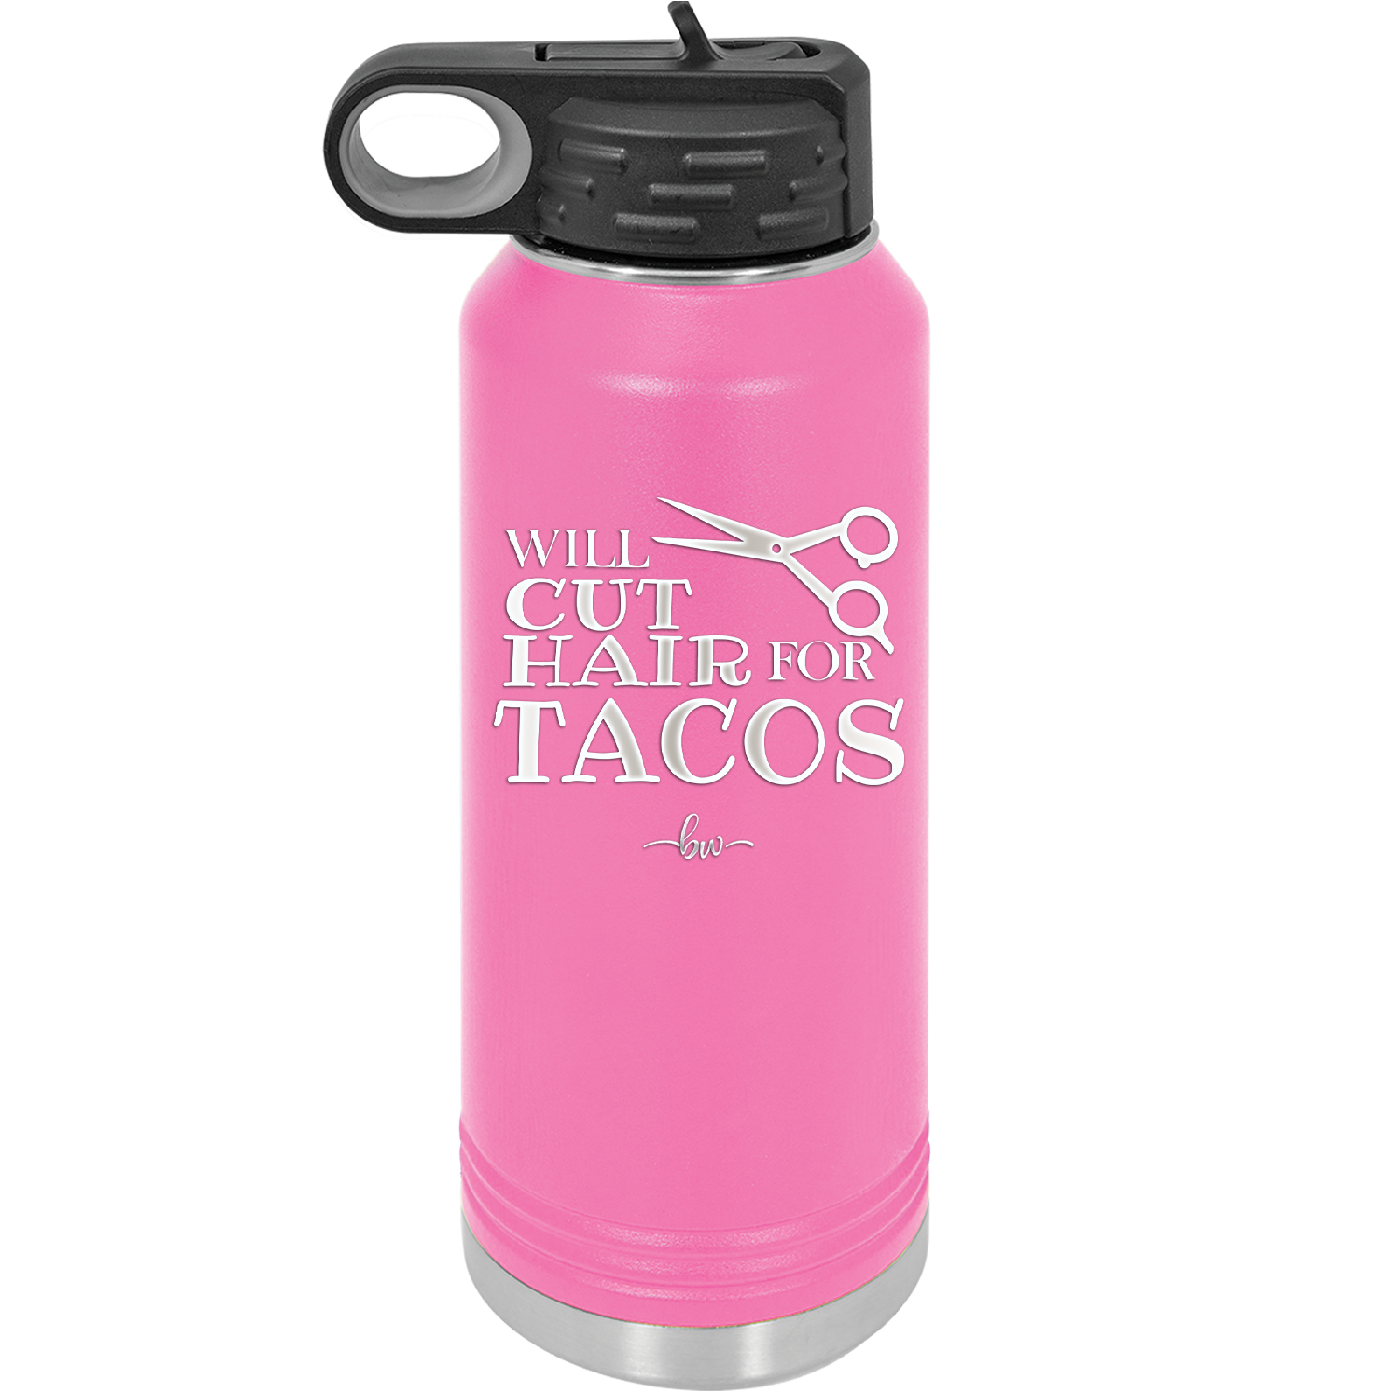 Will Cut Hair for Tacos - Laser Engraved Stainless Steel Drinkware - 2128 -